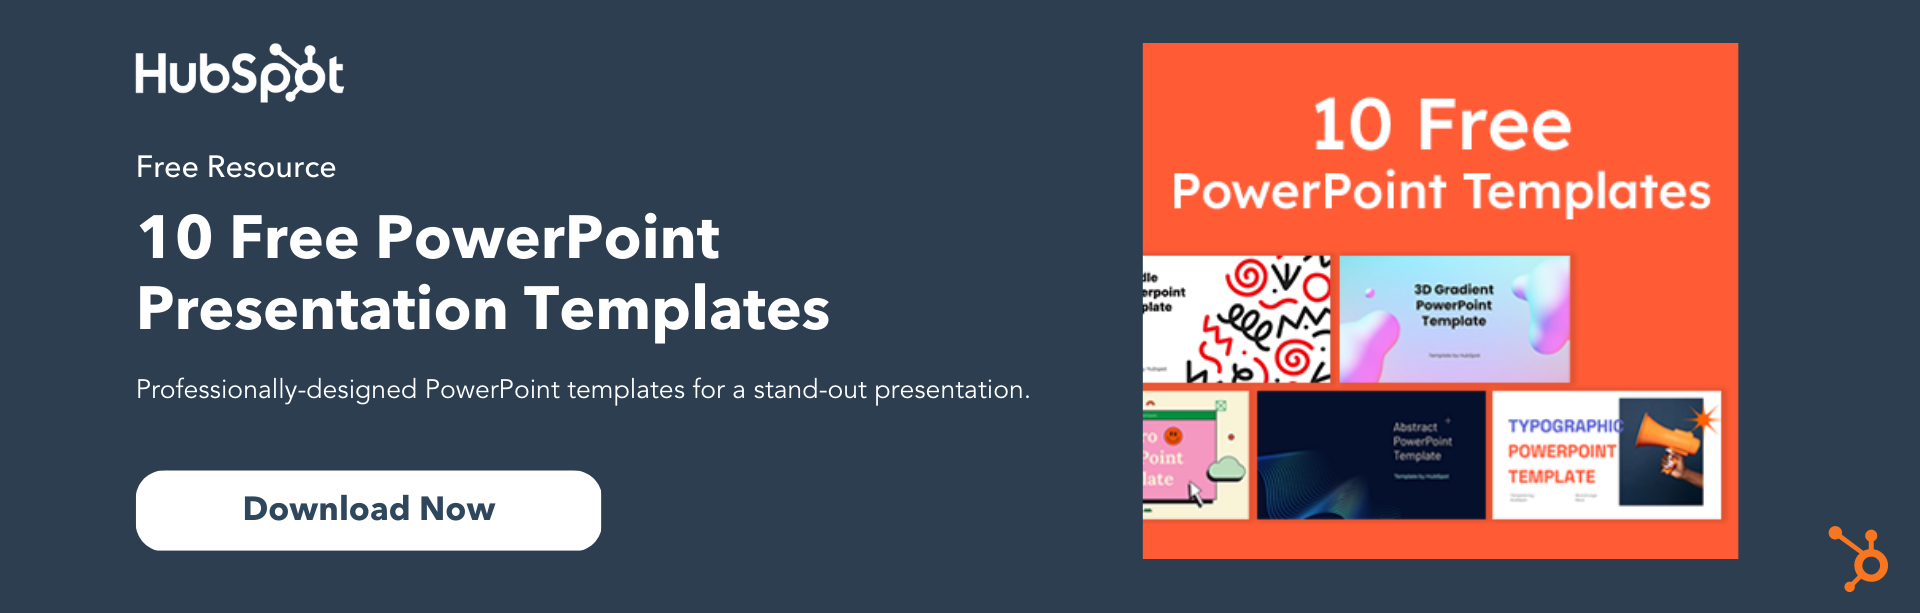 105+ Creative Presentation Ideas to Engage Your Audience